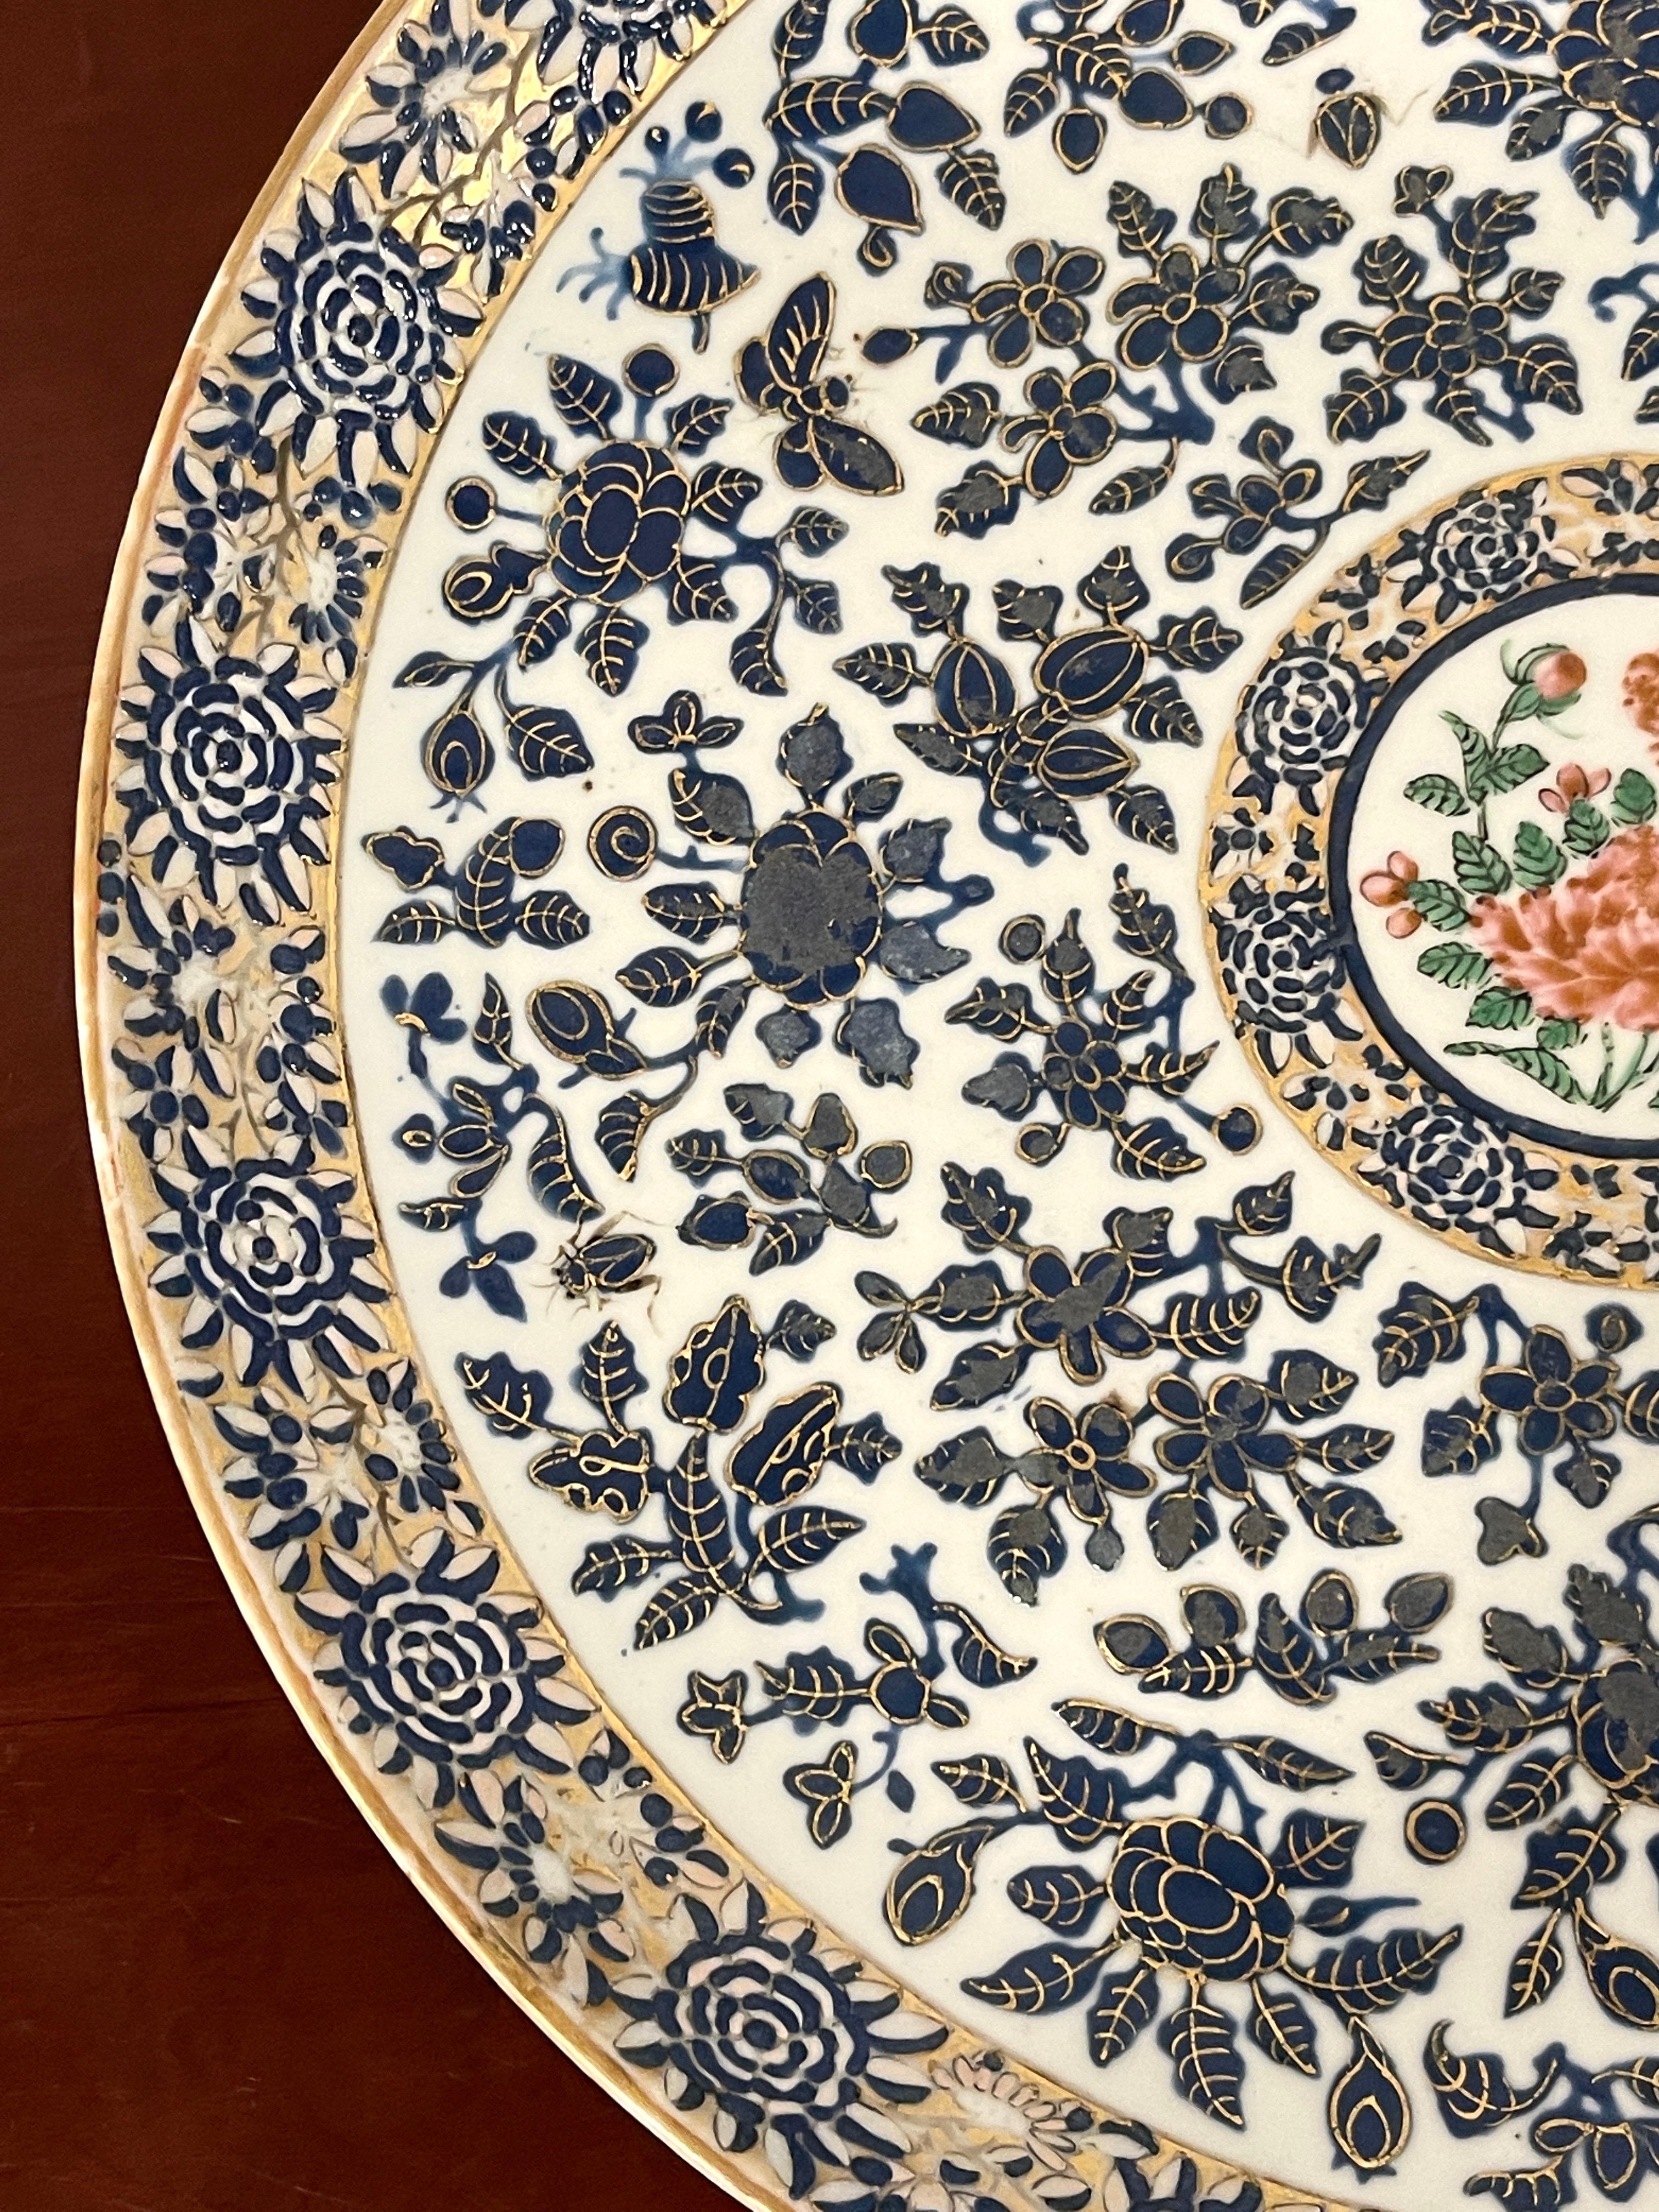 Porcelain 19th Century Chinese Rose Famille Decorated Chrysanthemum Motif Charger For Sale